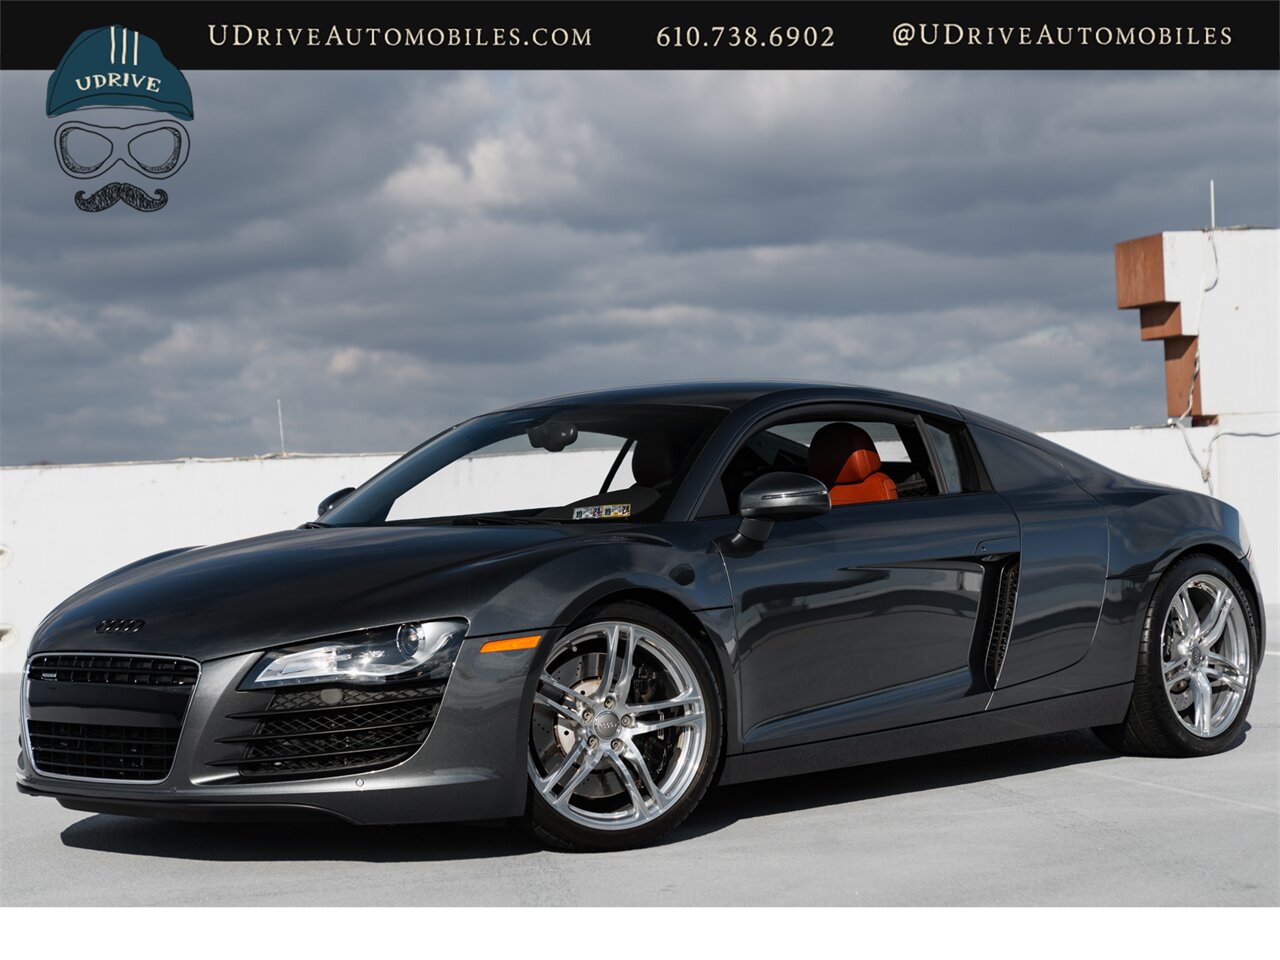 2009 Audi R8 Quattro  4.2 V8 6 Speed Manual 15k Miles - Photo 1 - West Chester, PA 19382